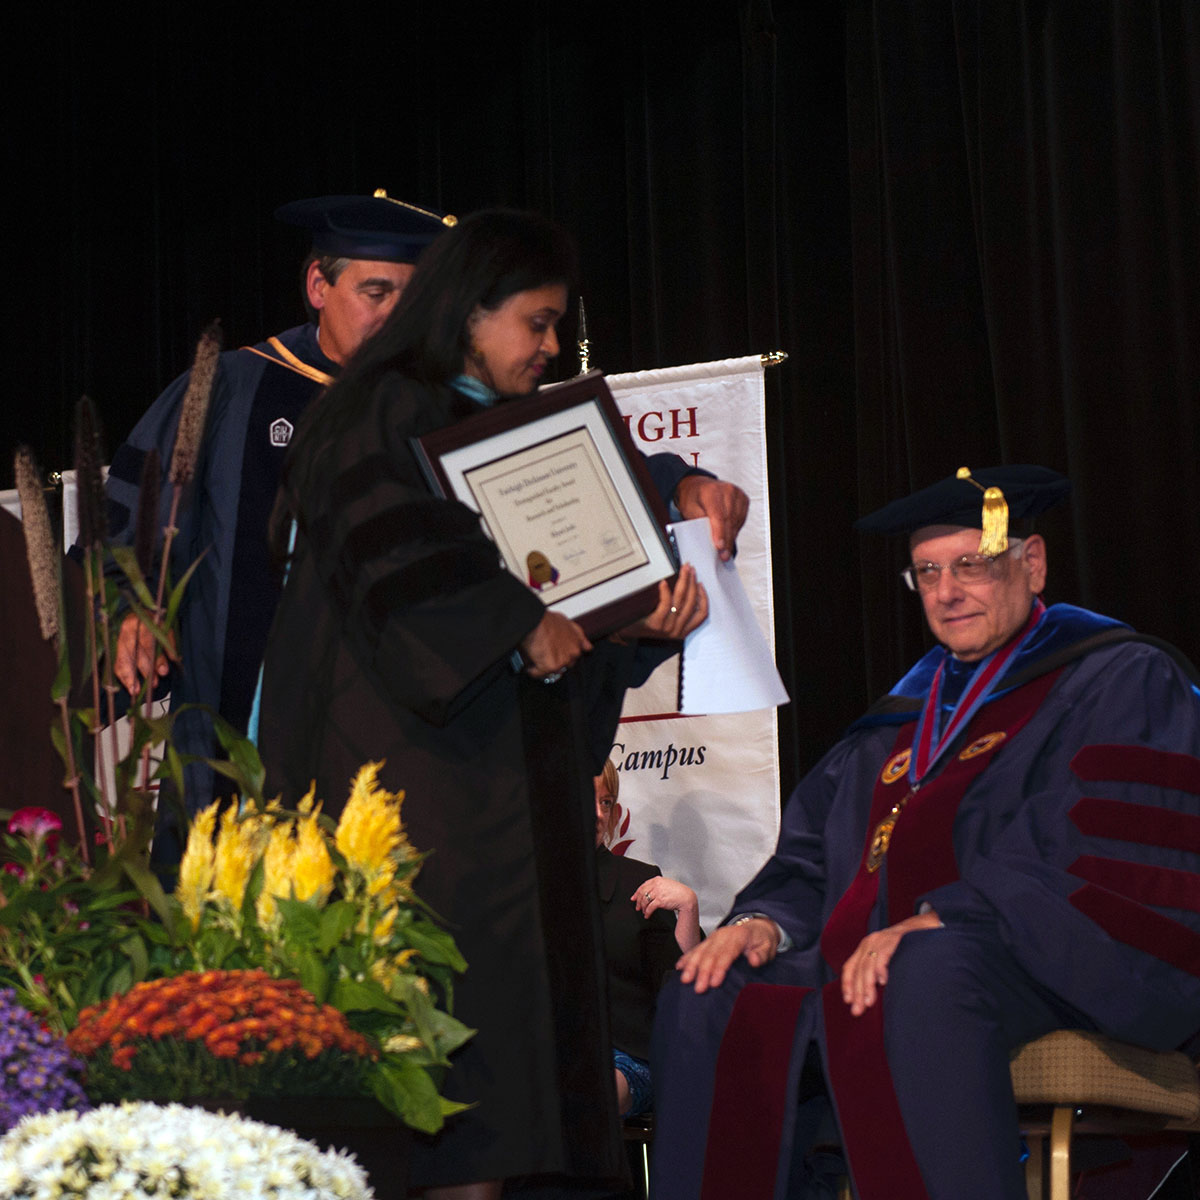 Prof. Khyati Y. Joshi accepting the Distinguished Faculty Award for Research & Scholarshop at Fairleigh Dickinson University in 2014.